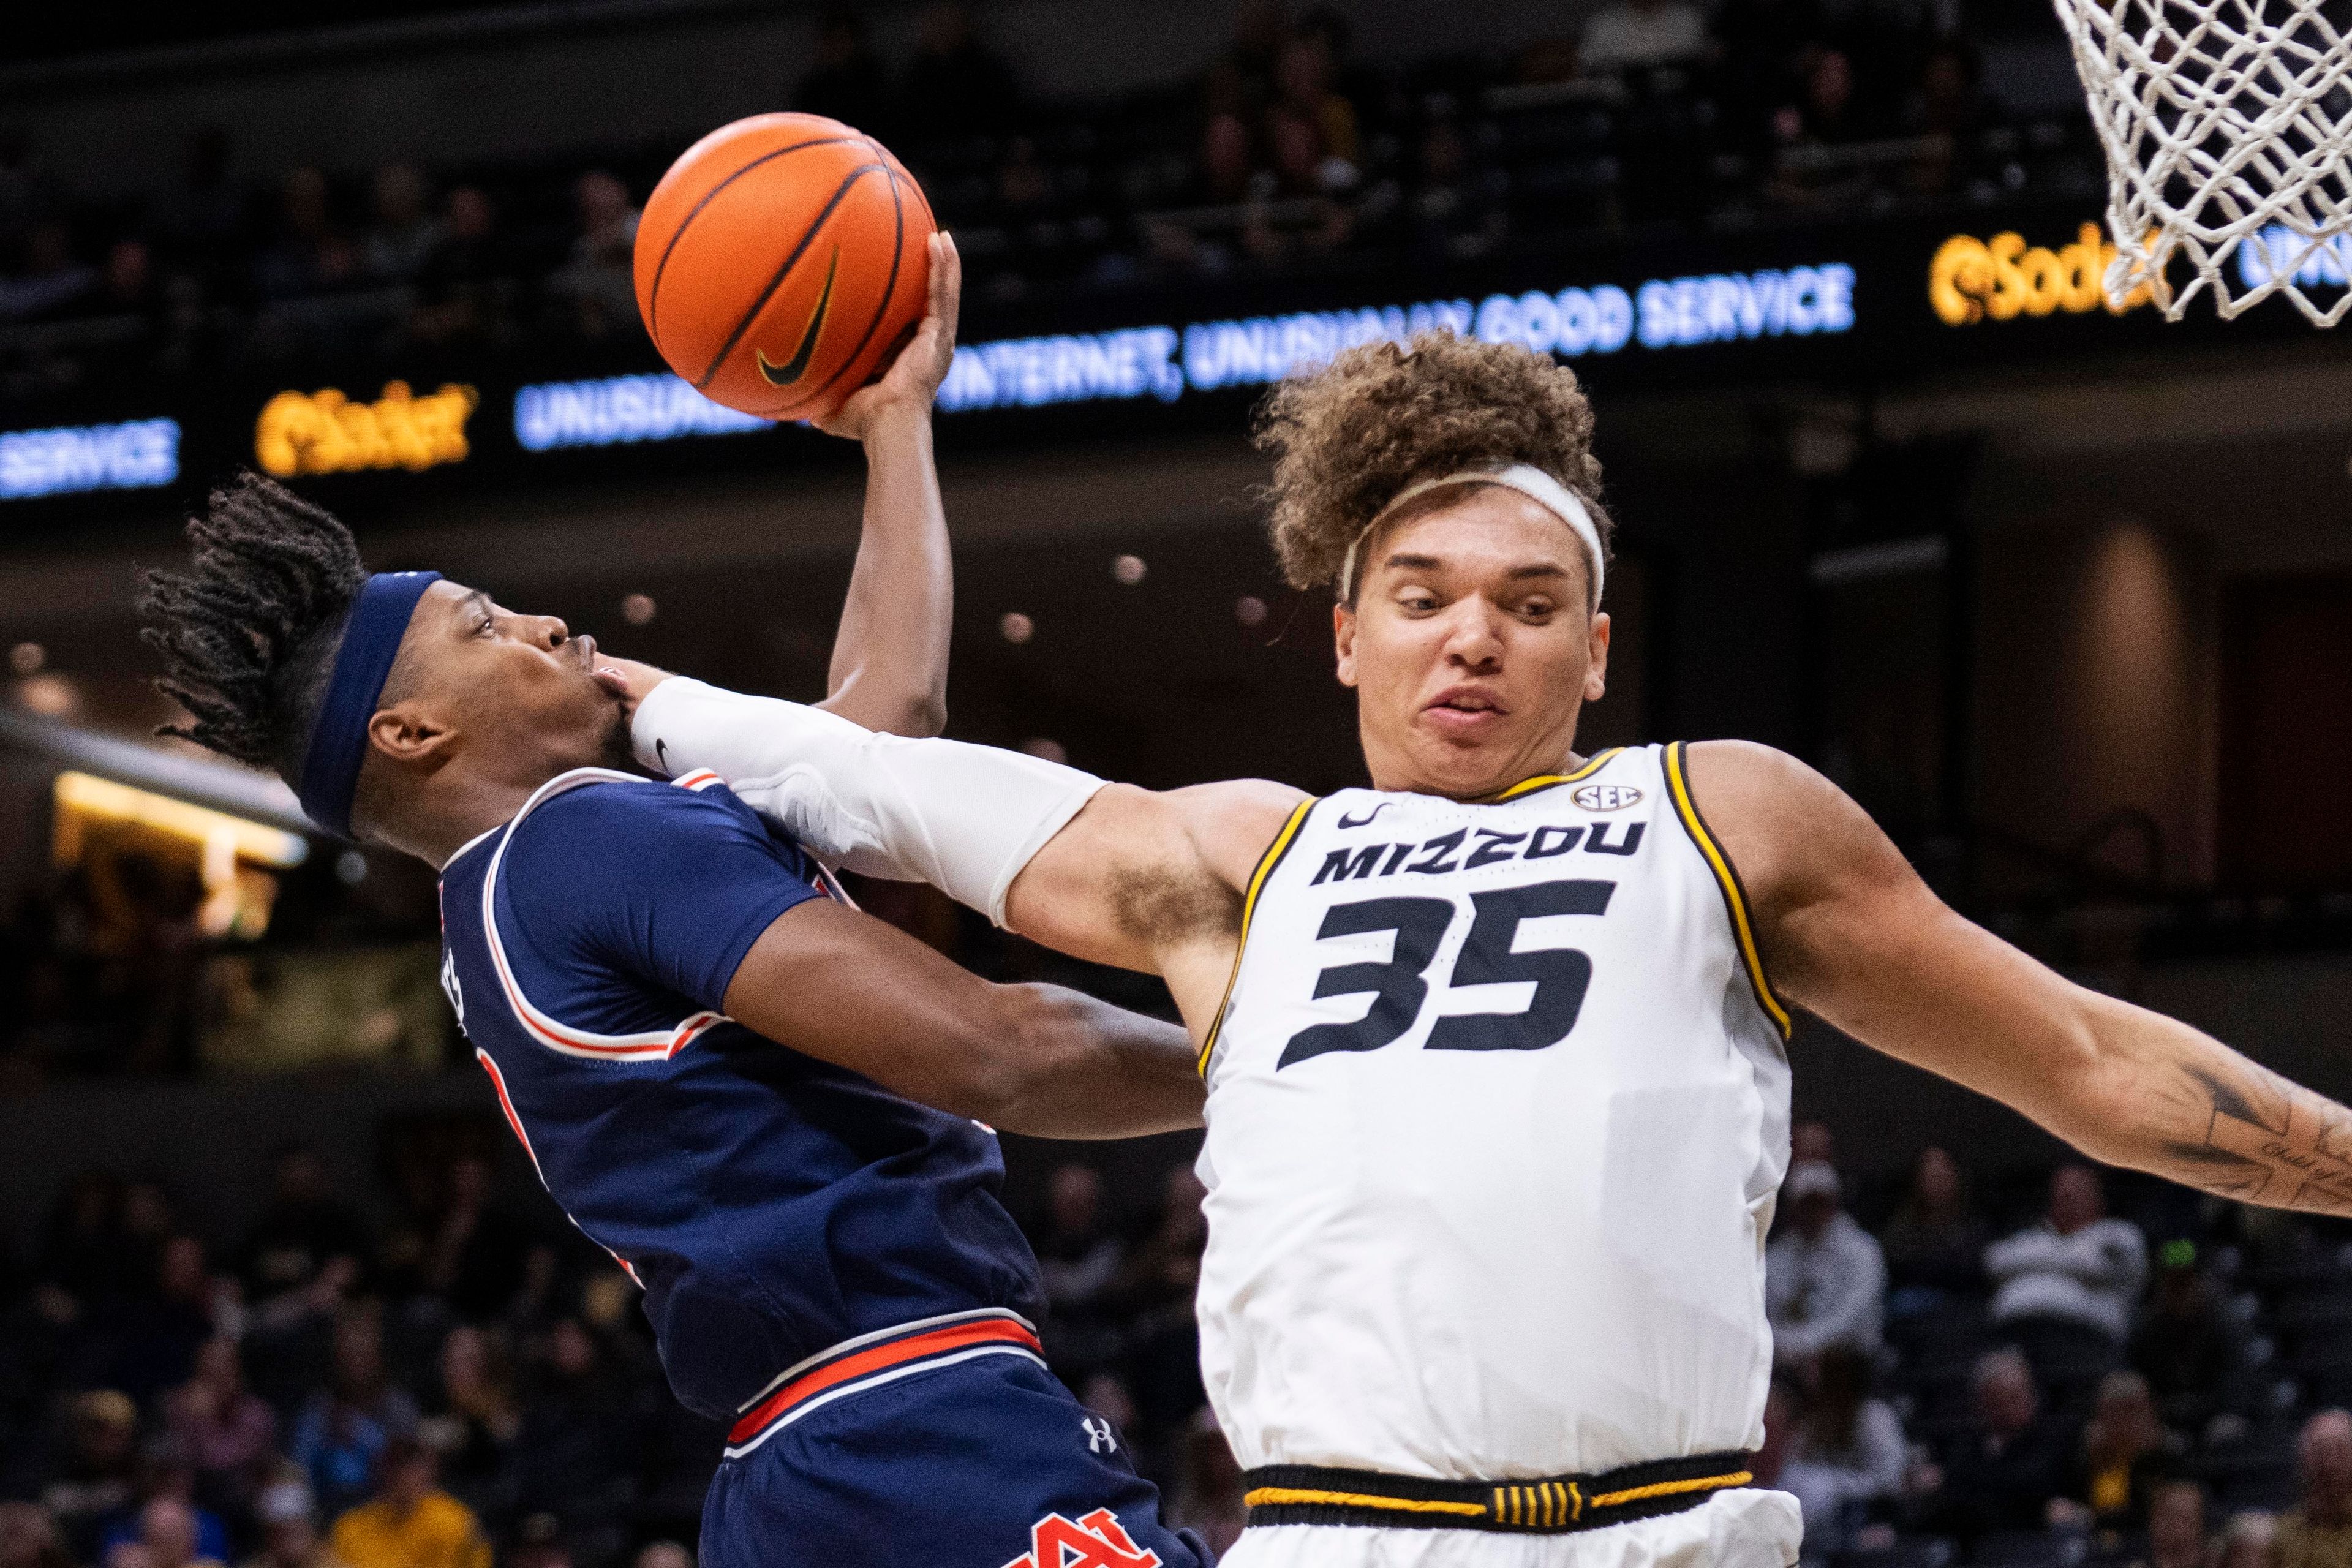 Auburn's Denver Jones, left, is fouled by Missouri's Noah Carter during the first half of an NCAA college basketball game Tuesday, March 5, 2024, in Columbia, Mo. (AP Photo/L.G. Patterson)